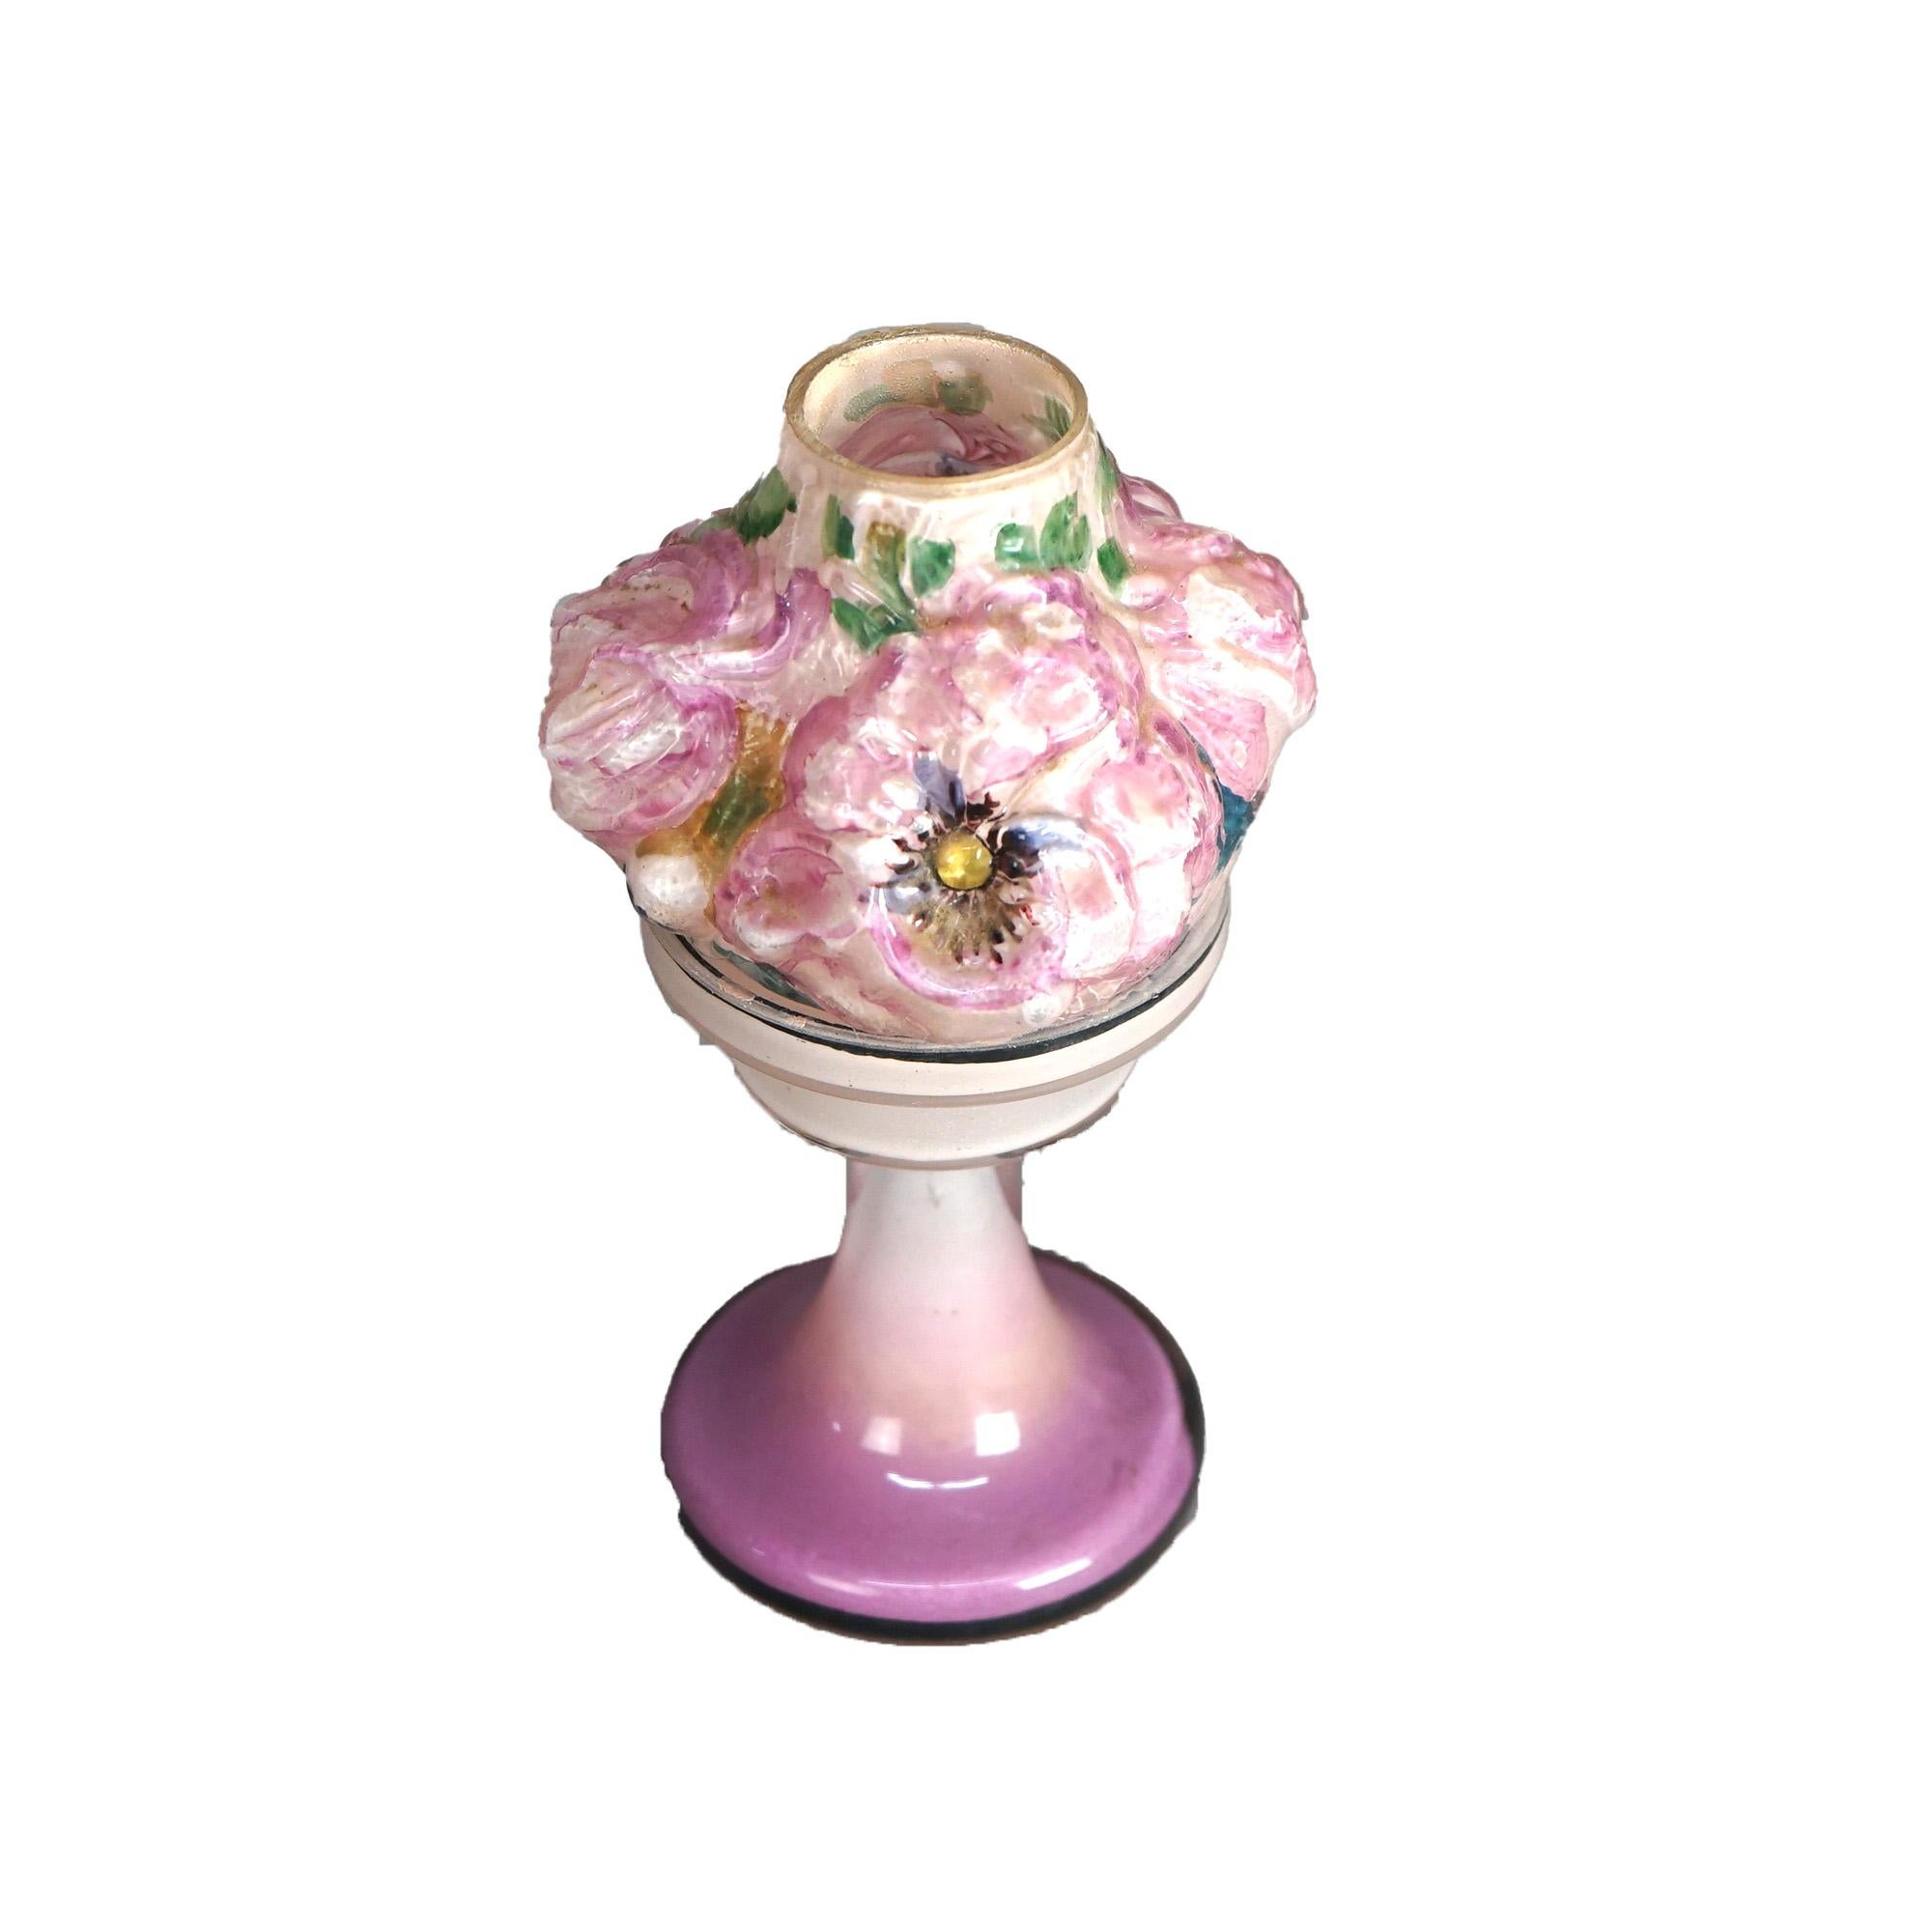 American Antique Pairpoint Art Glass Puffy Candle Lamp with Peonies Circa 1910